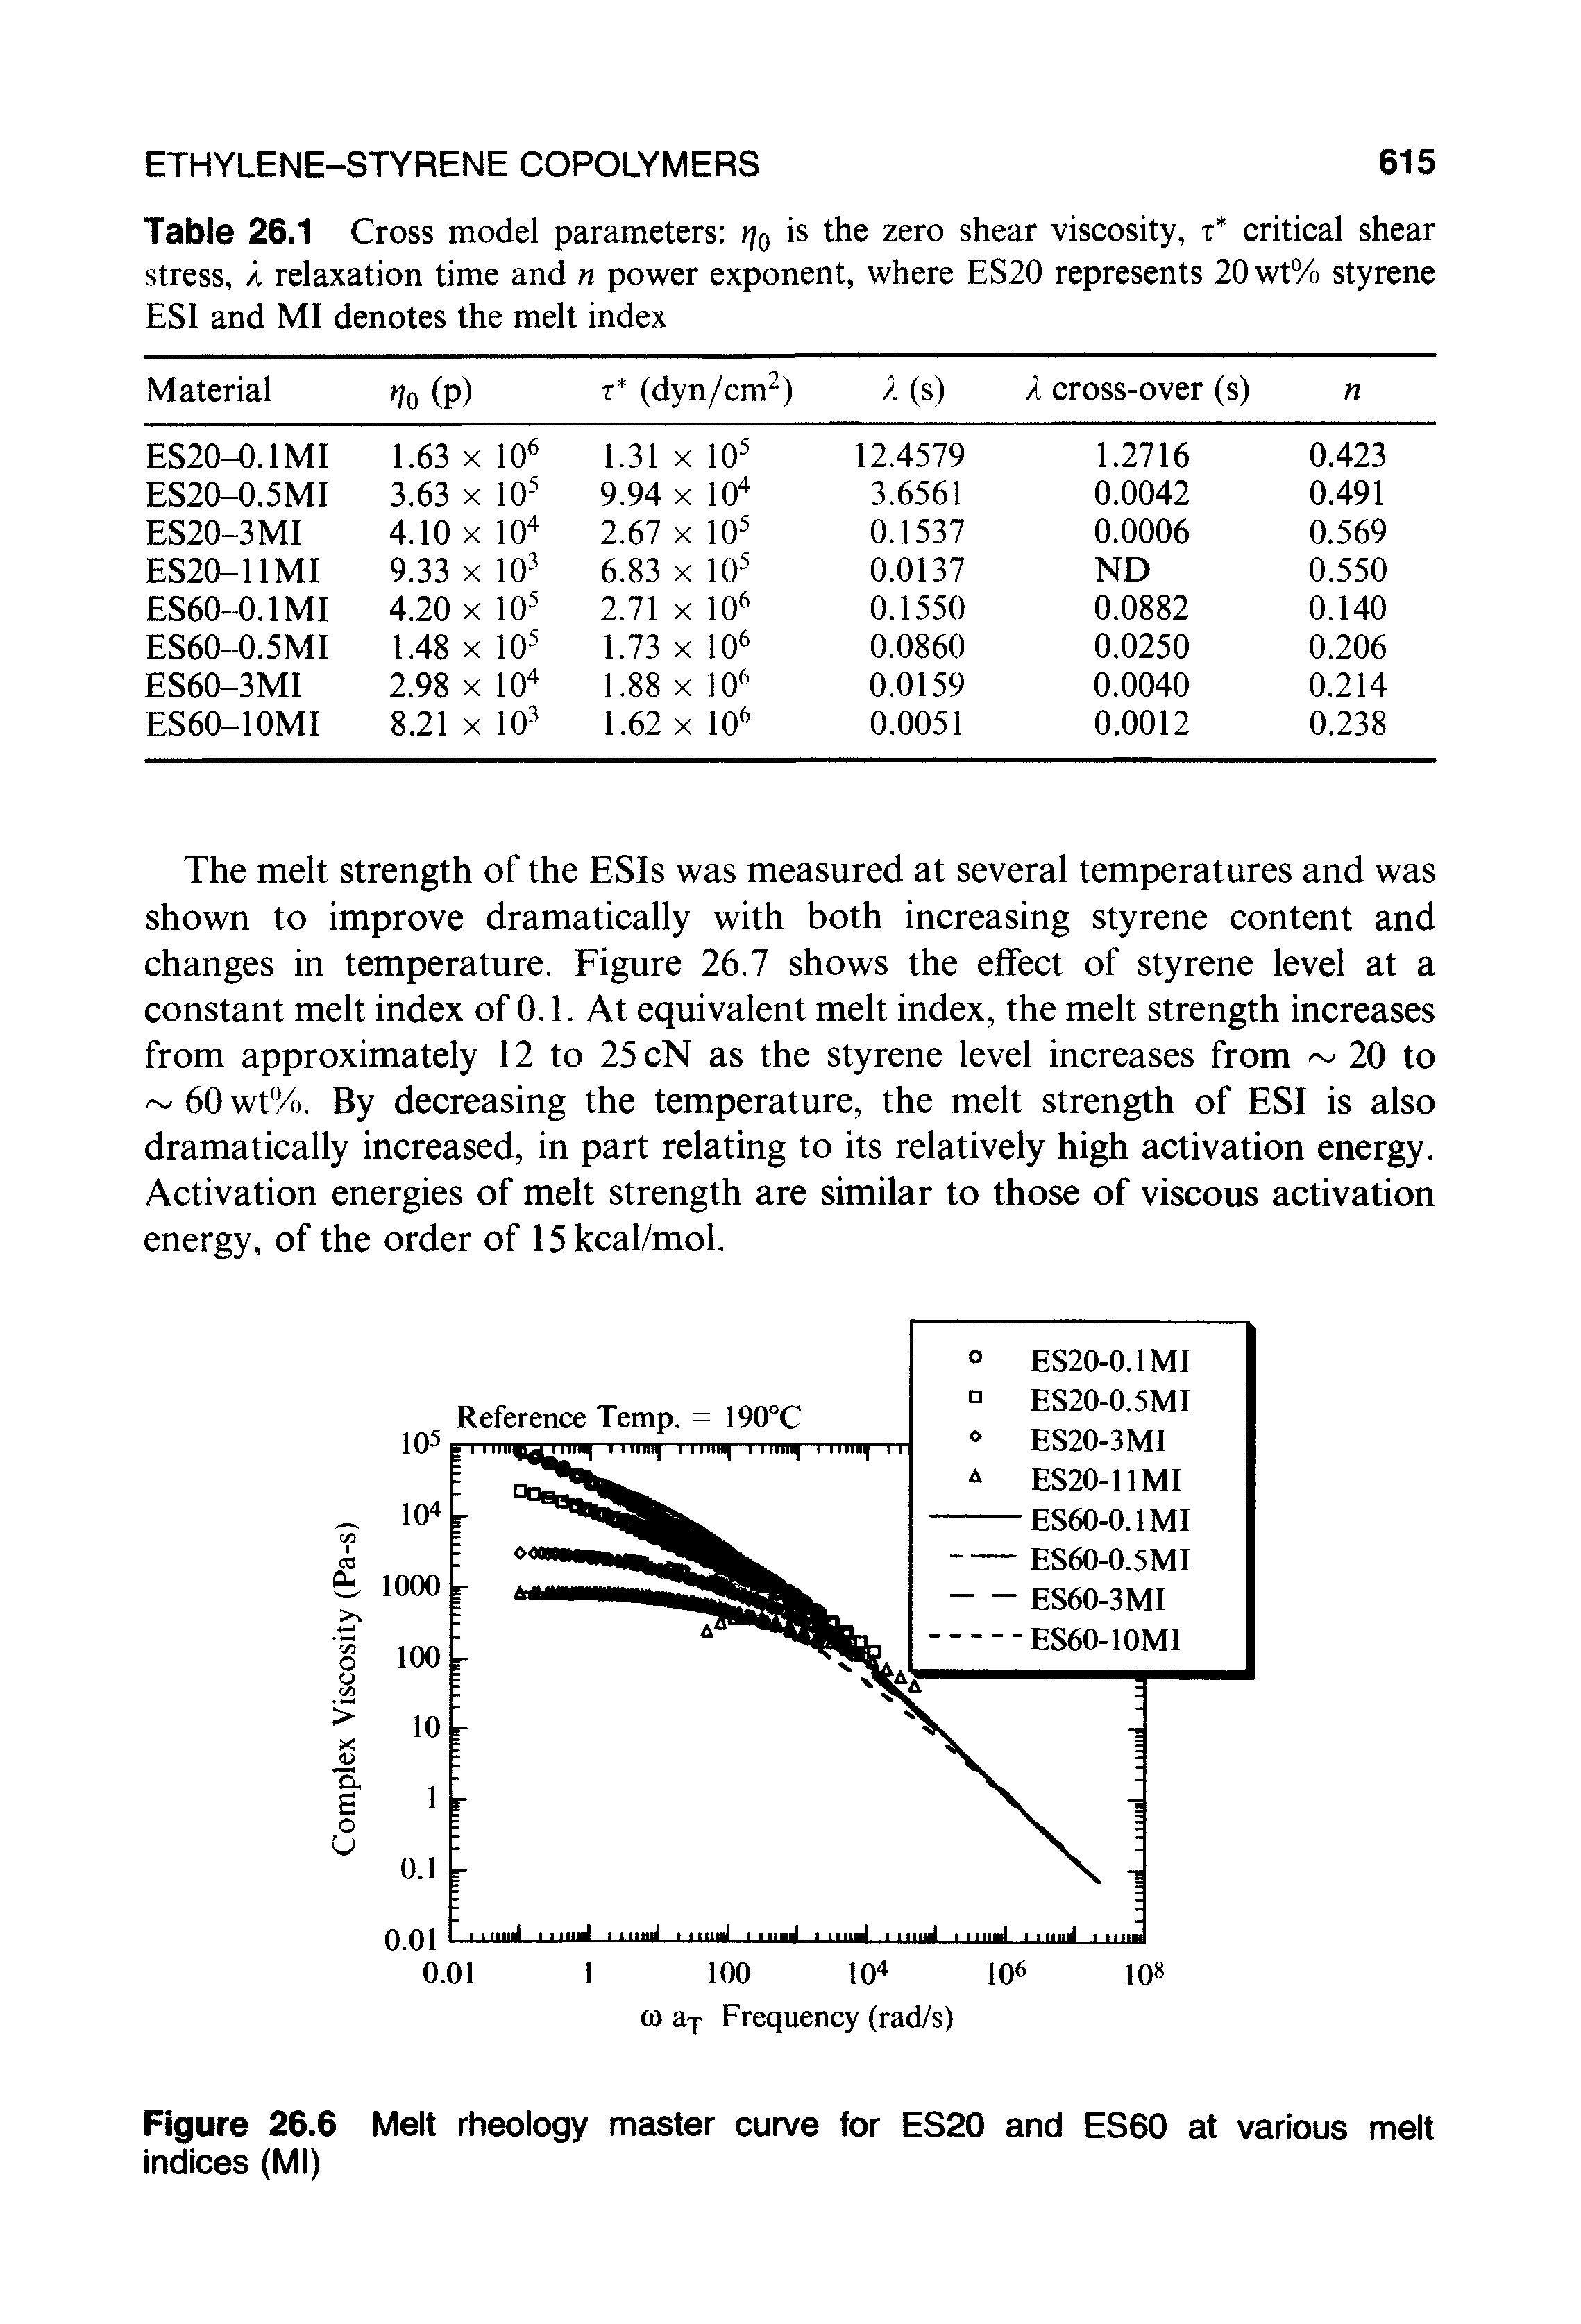 Figure 26.6 Melt rheology master curve for ES20 and ES60 at various melt indices (Ml)...